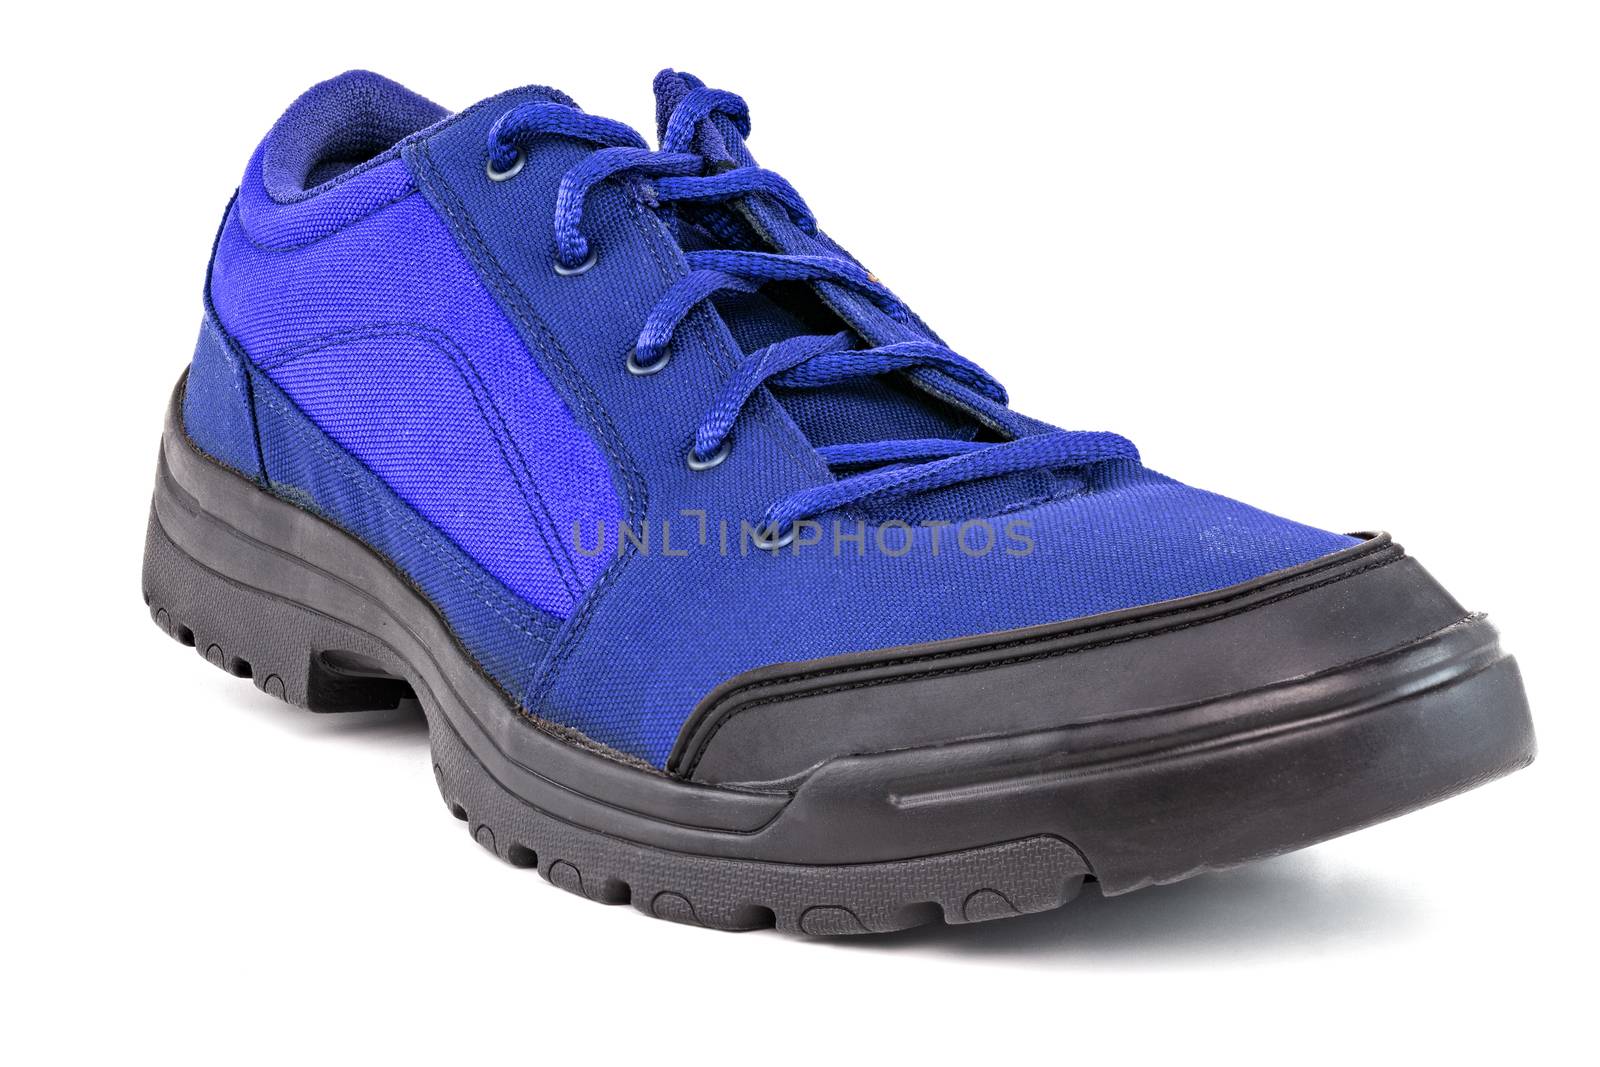 right cheap simple blue hiking or hunting shoe isolated on white background.